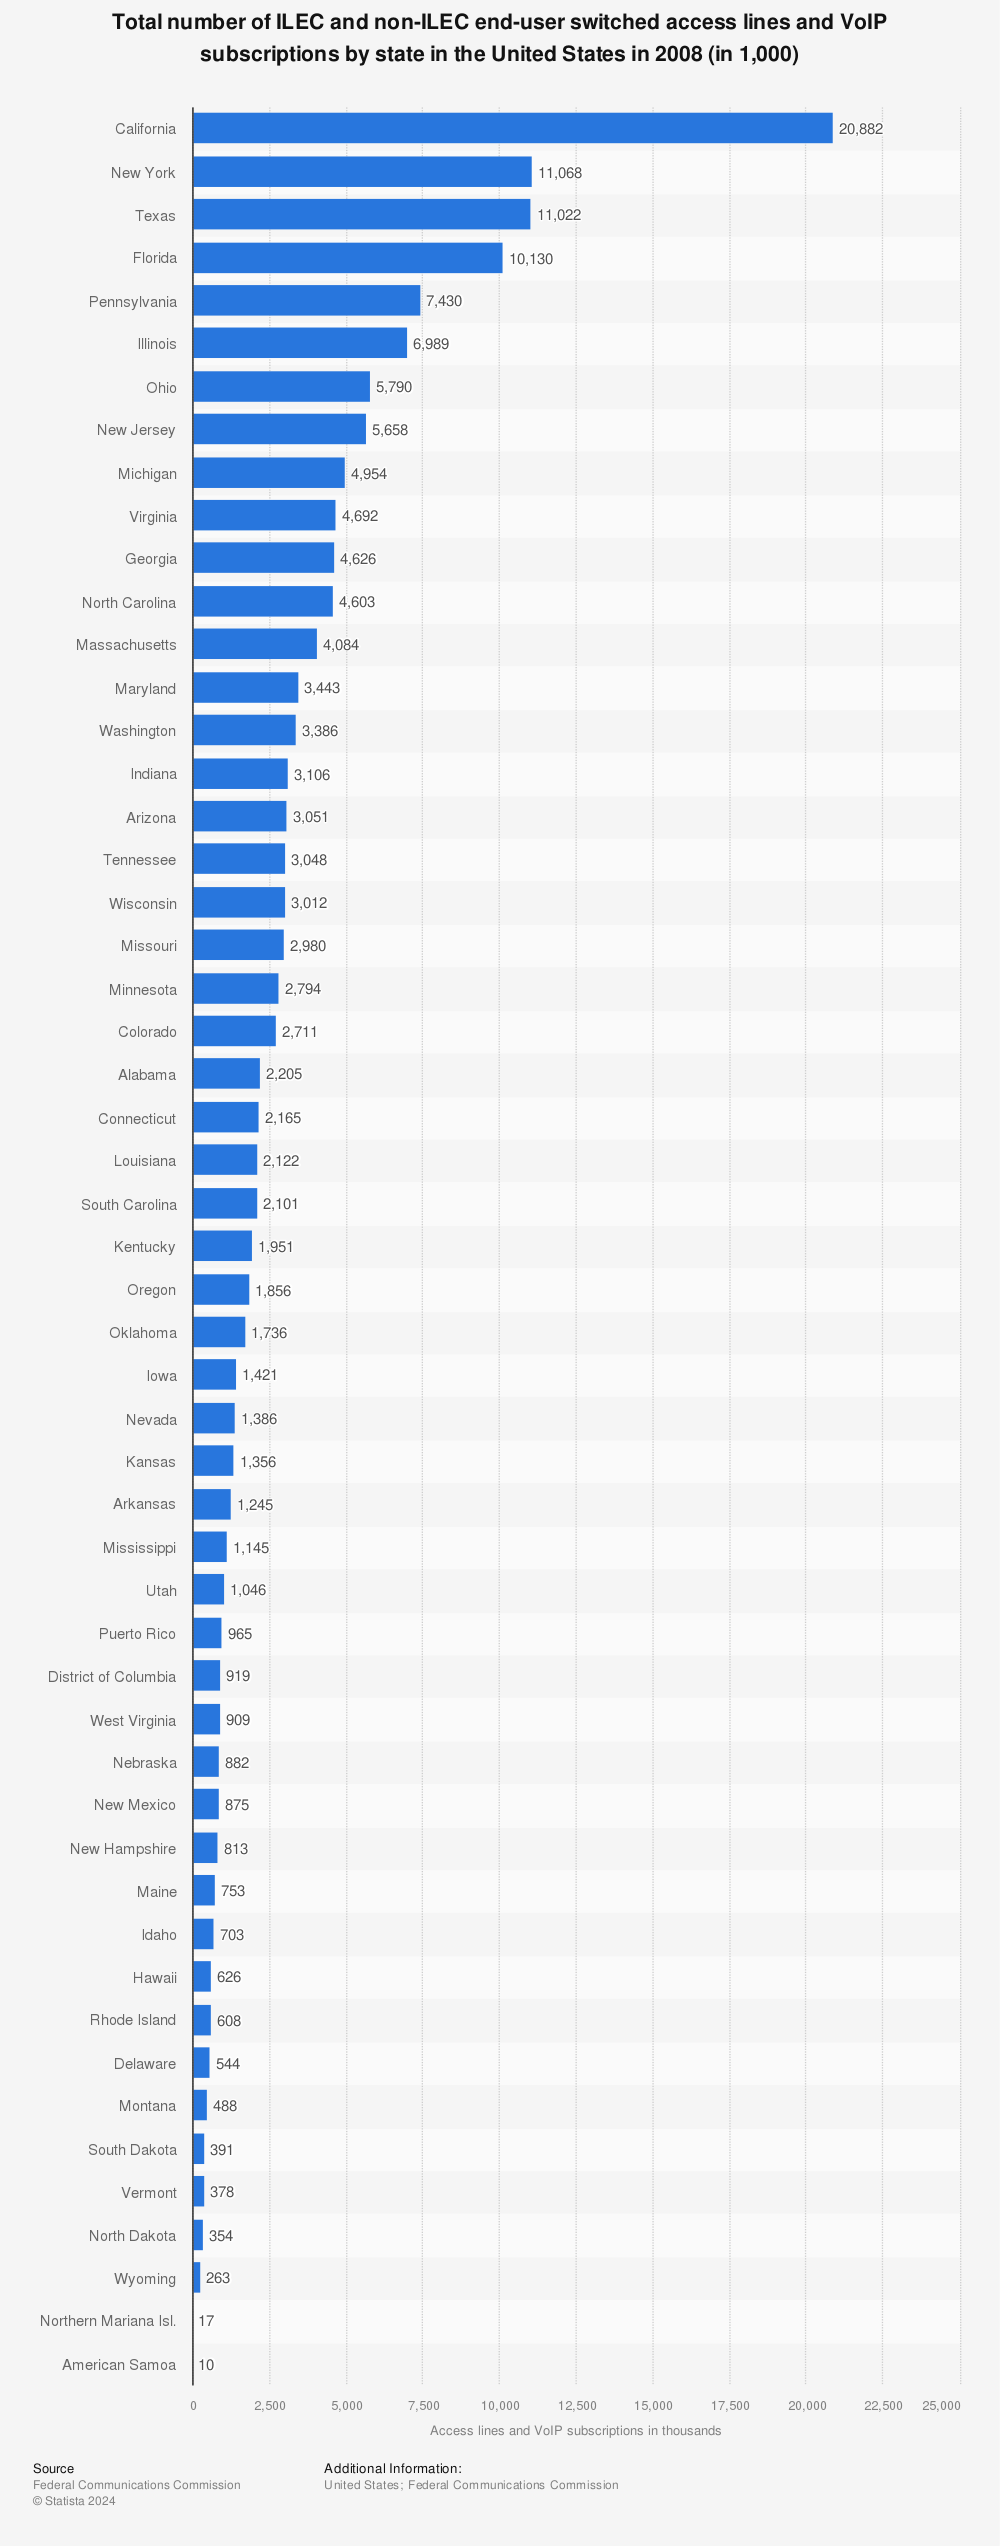 Statistic: Total number of ILEC and non-ILEC end-user switched access lines and VoIP subscriptions by state in the United States in 2008 (in 1,000) | Statista